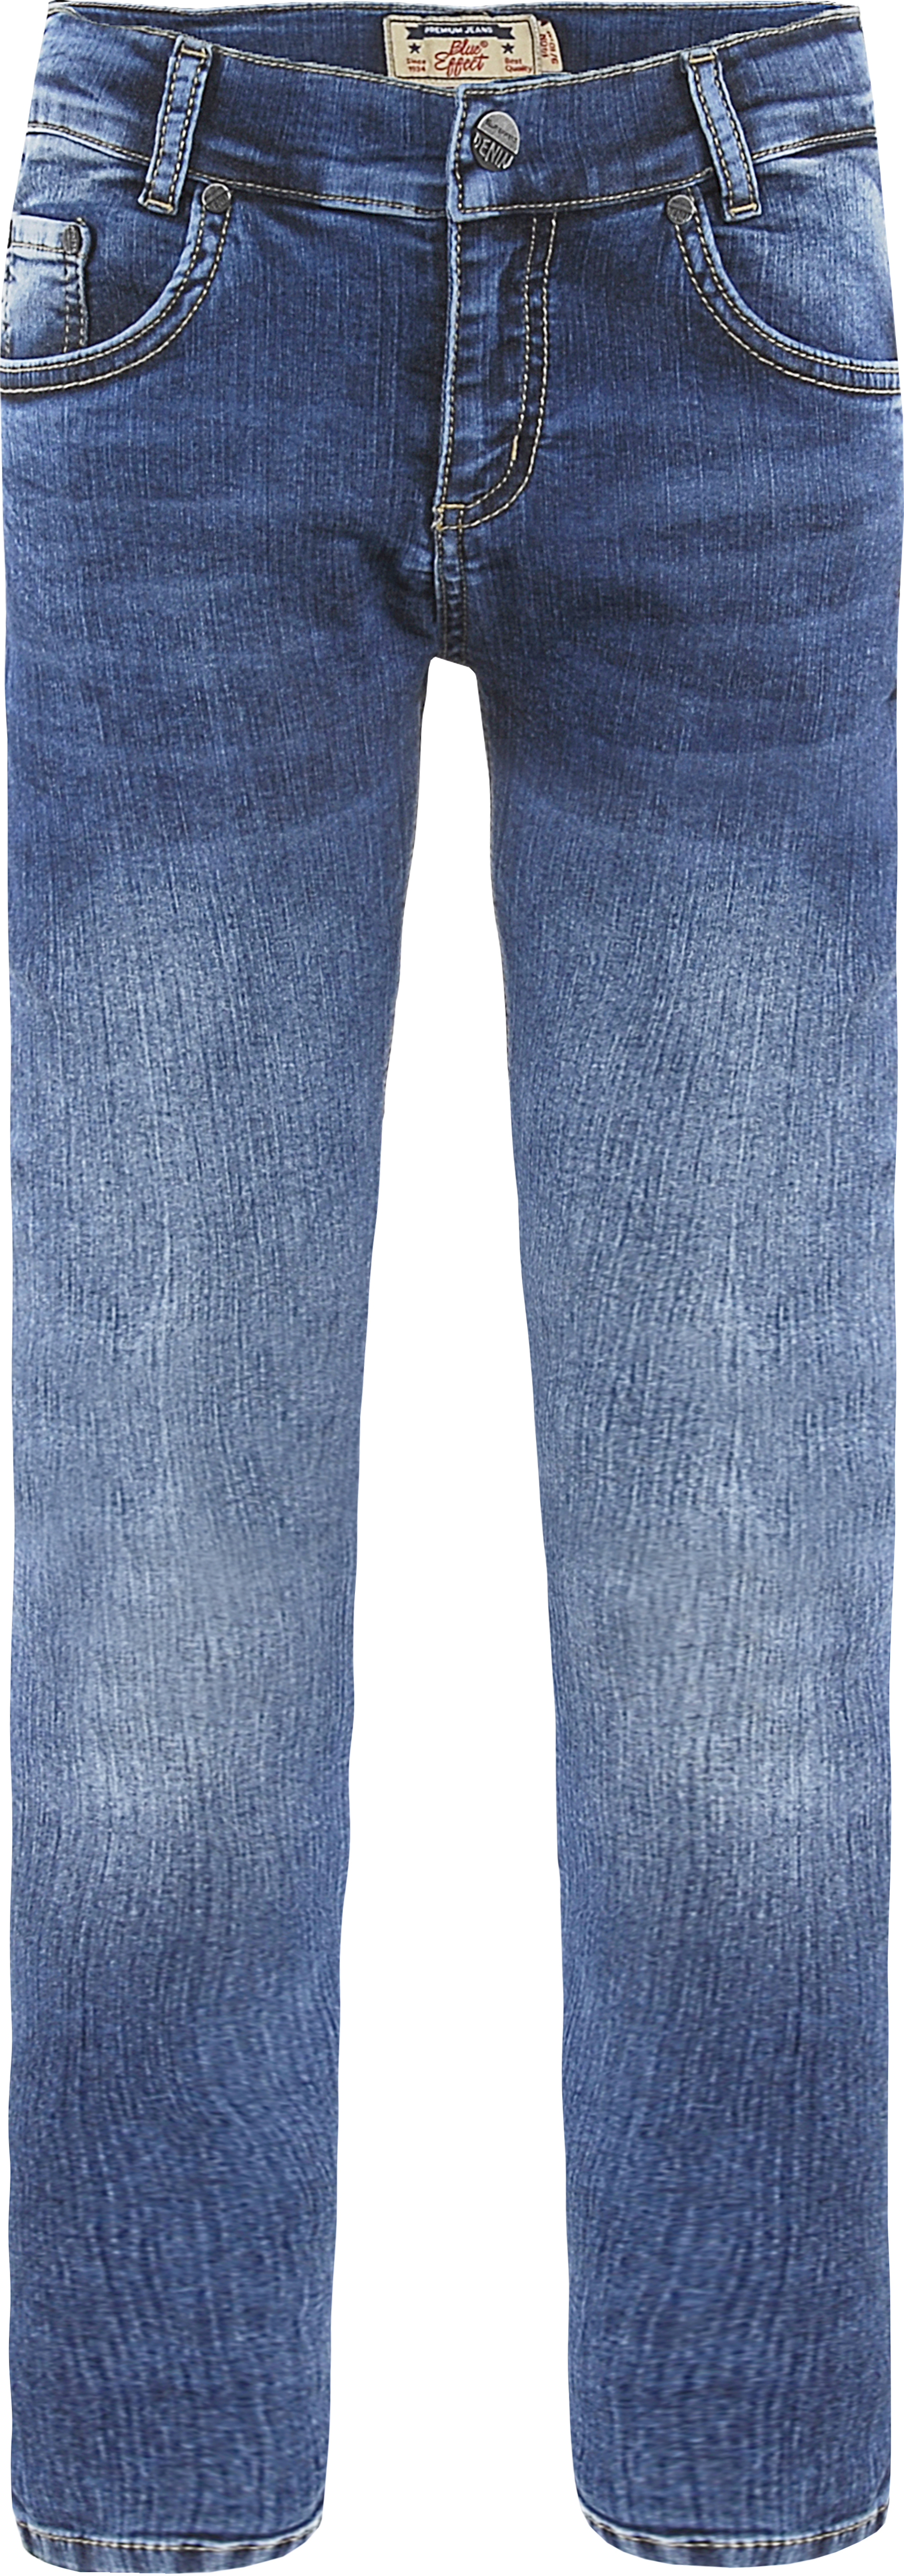 2726-NOS Boys Jeans Relaxed Fit, Ultrastretch, available in Normal